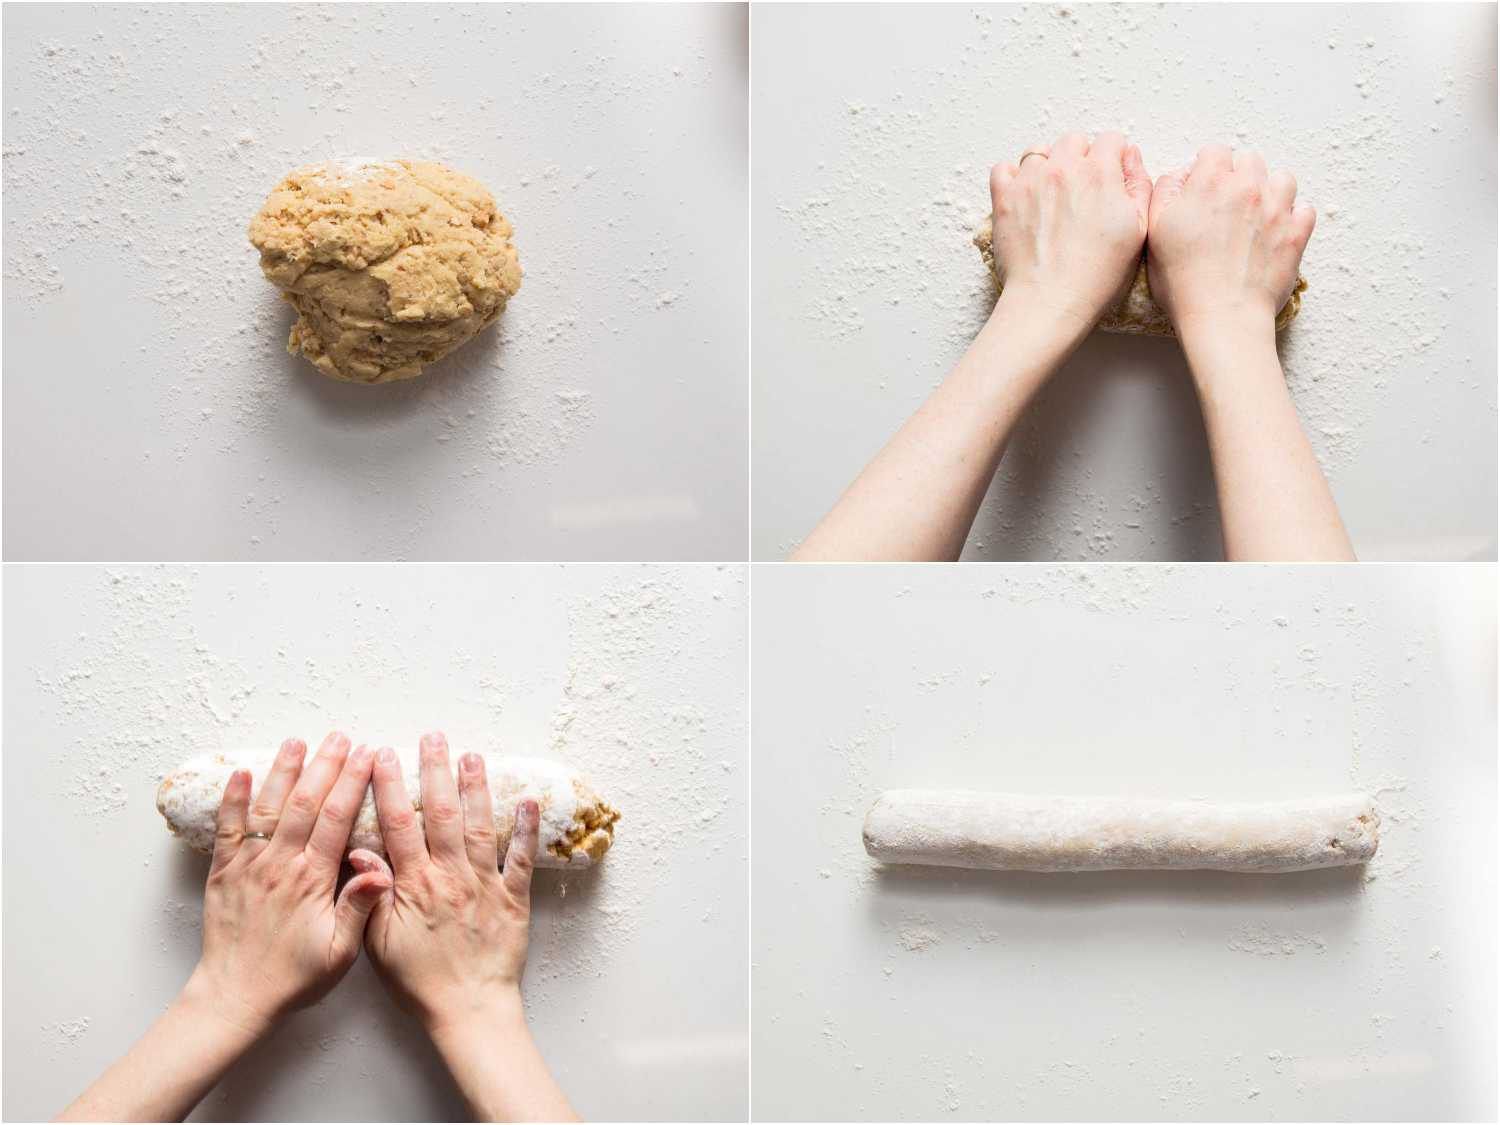 A collage showing the progress of forming the log of biscotti dough.